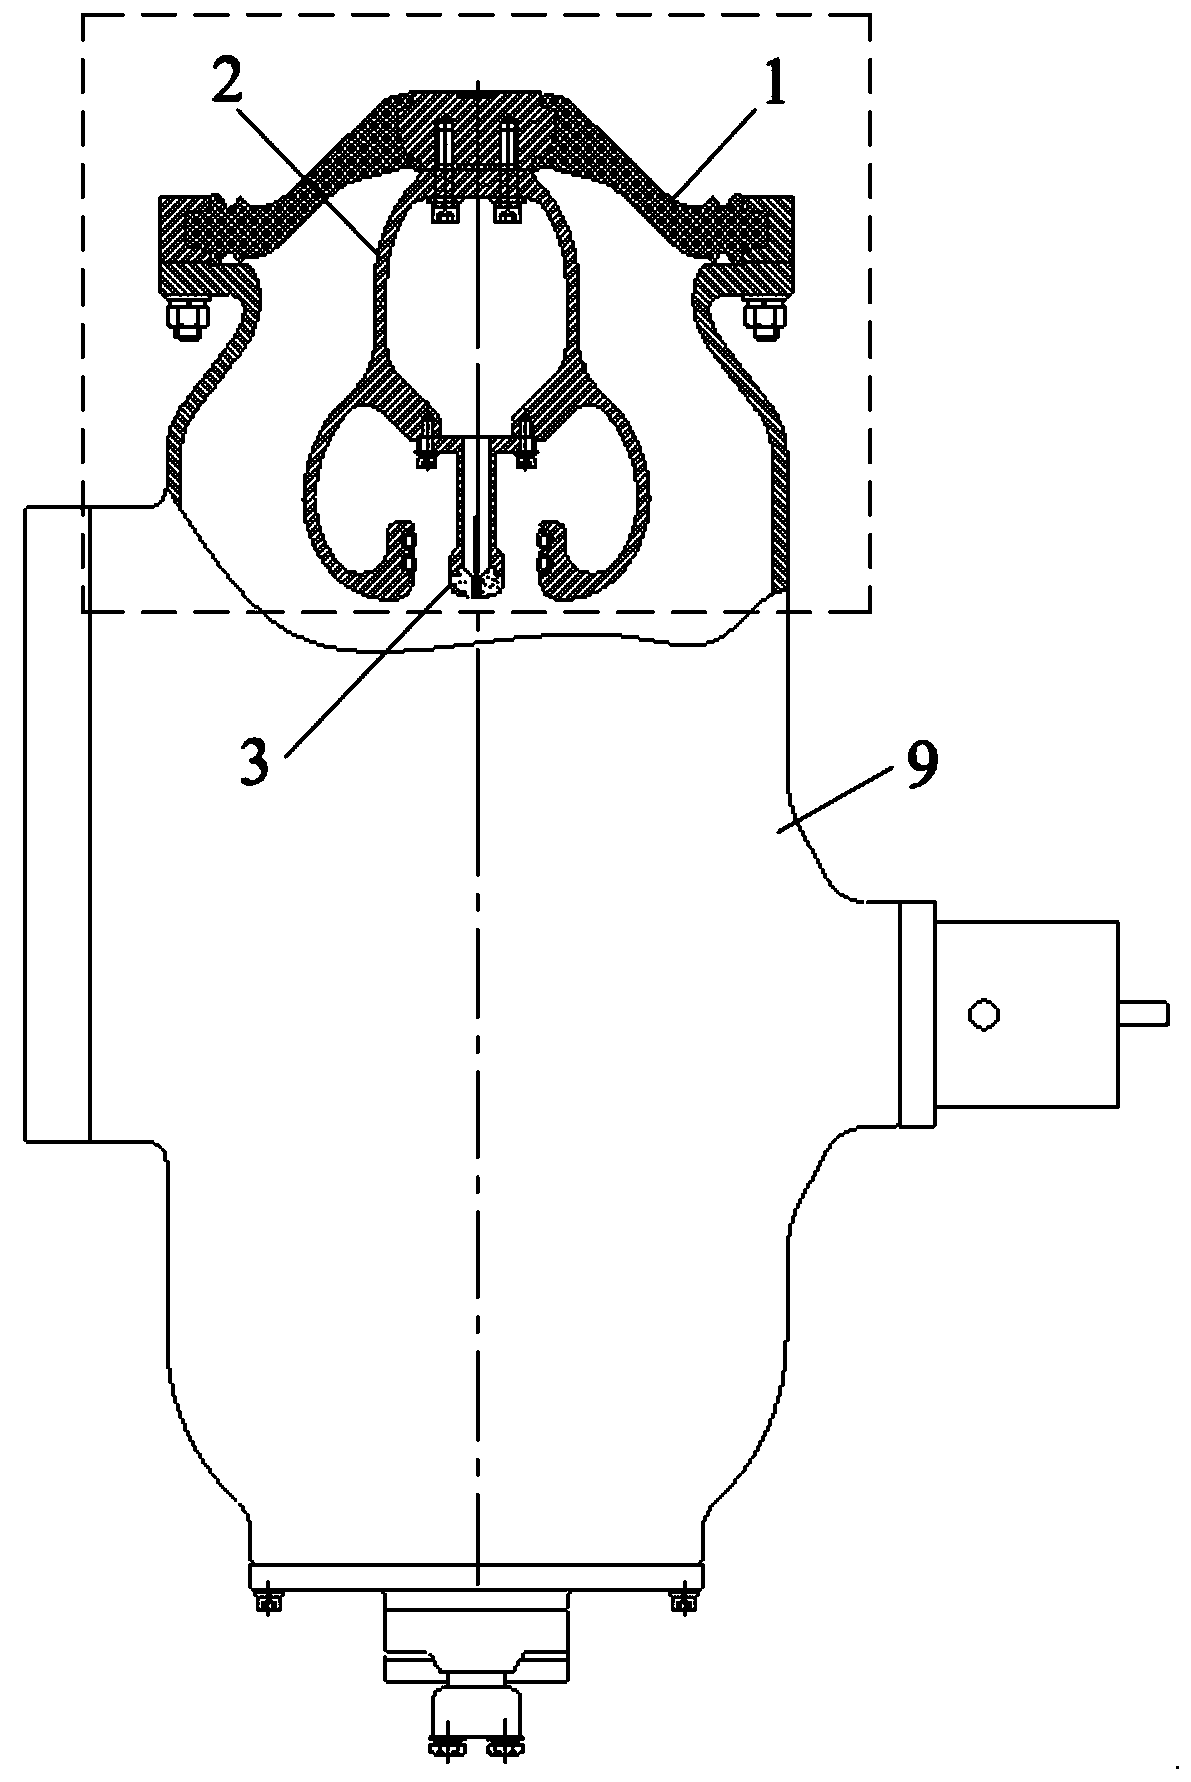 A static contact, a static contact assembly, and a gis isolating switch